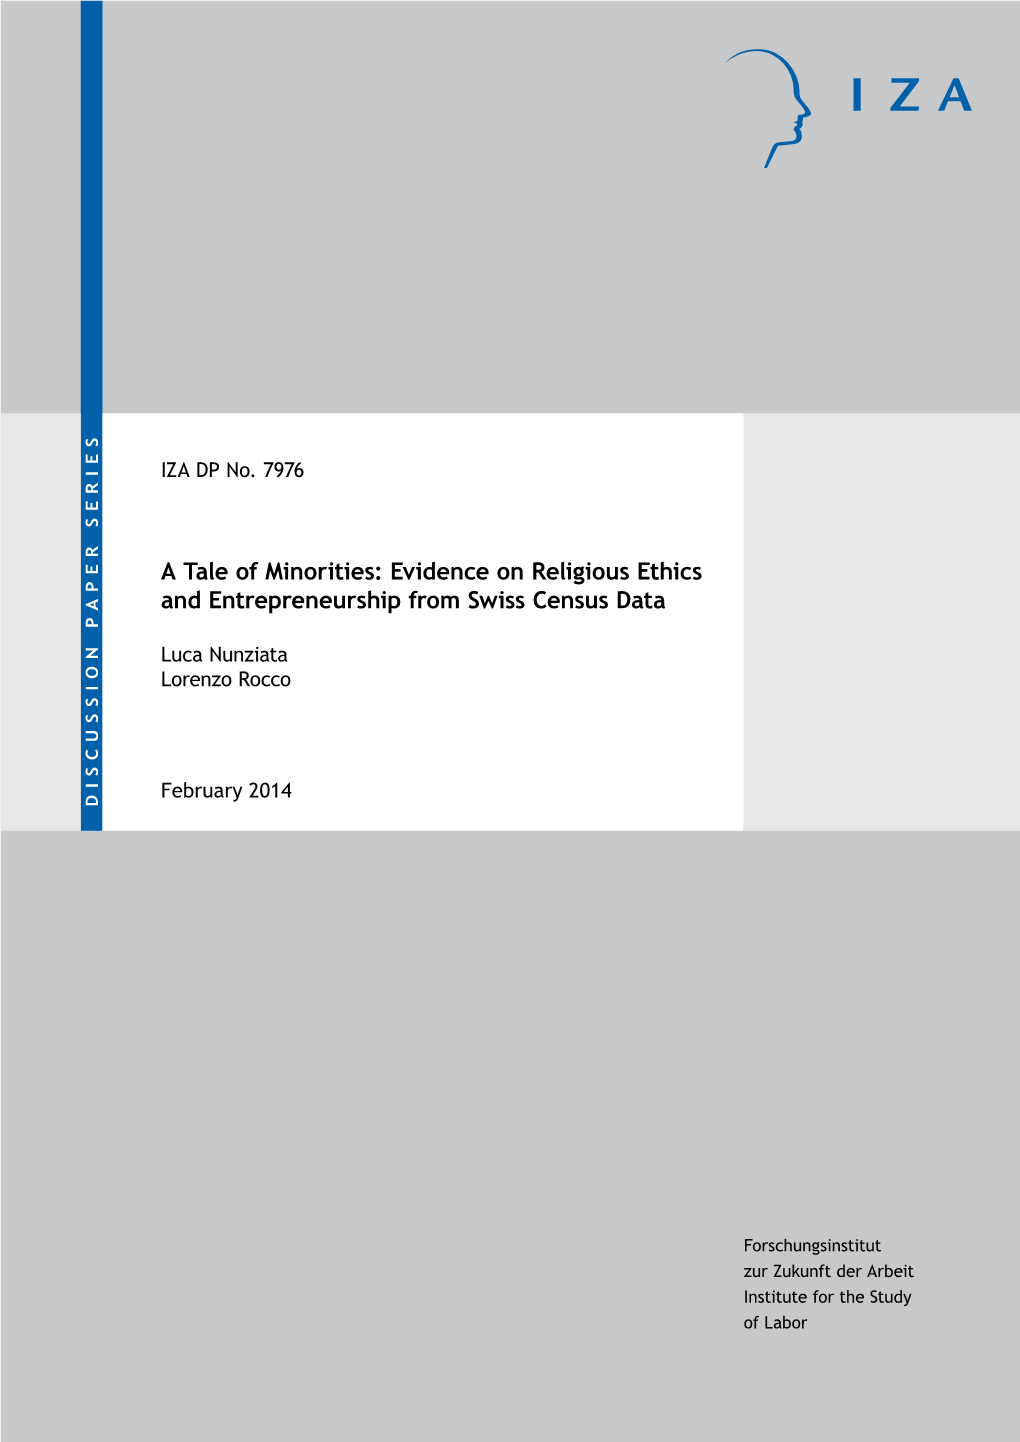 A Tale of Minorities: Evidence on Religious Ethics and Entrepreneurship from Swiss Census Data